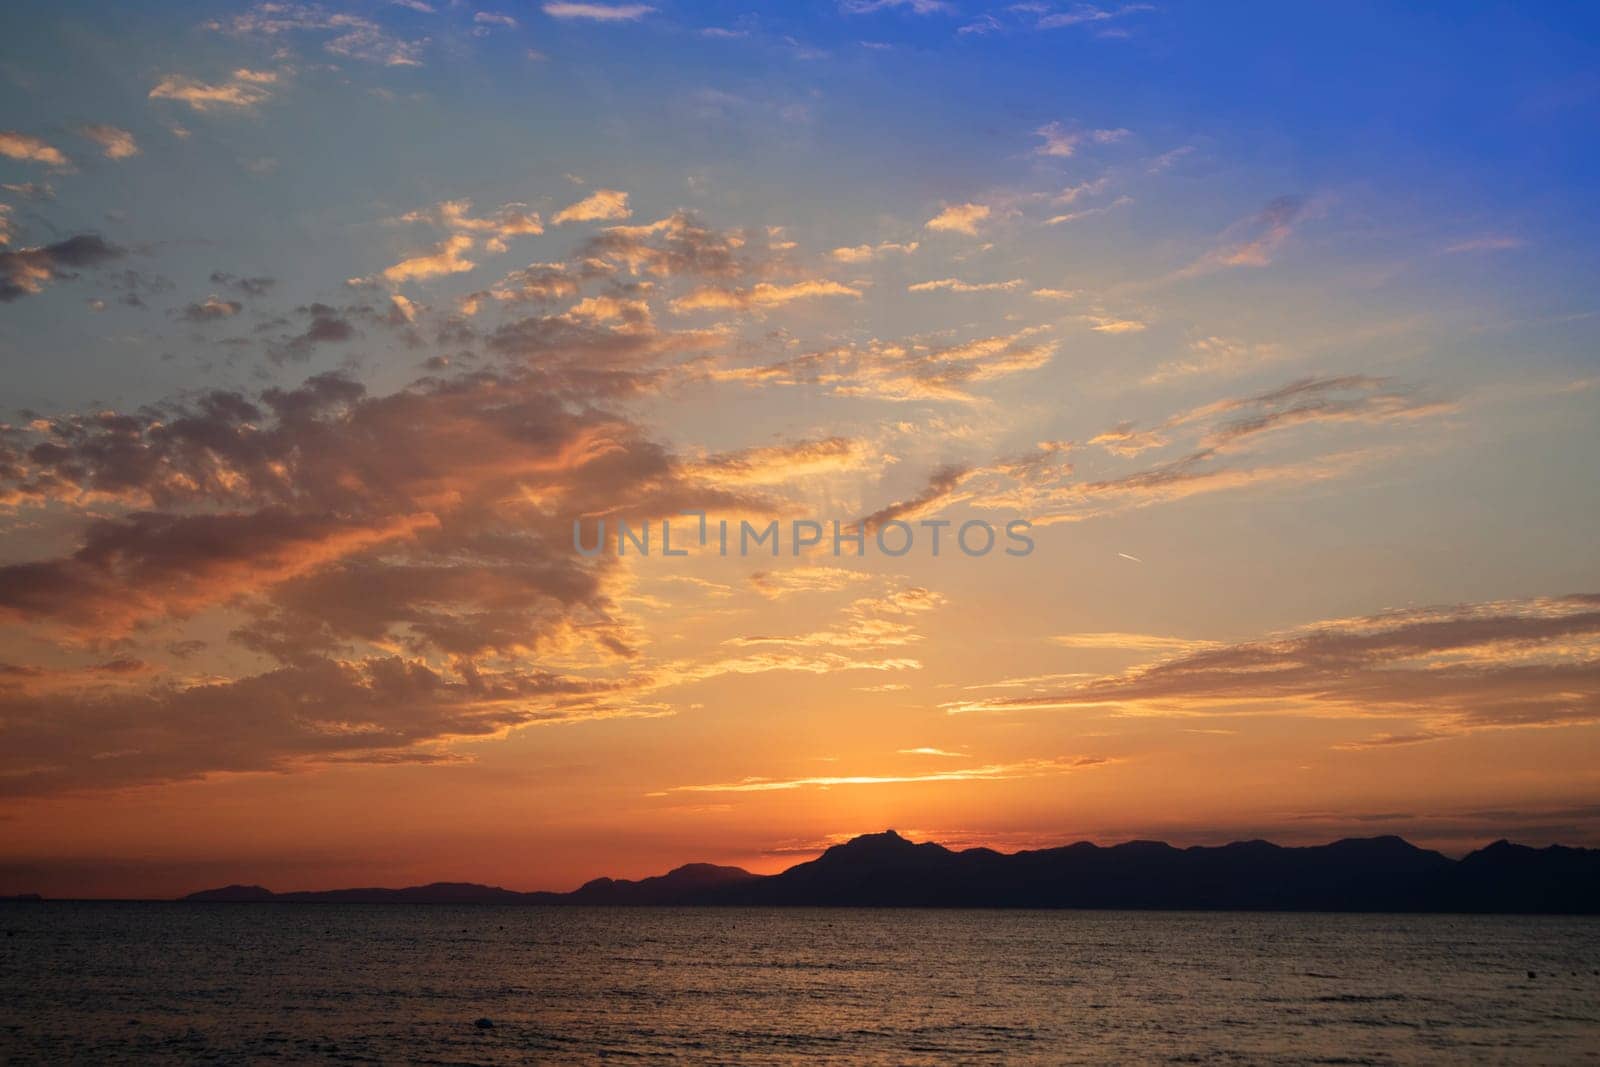 Photographic shot of the moment of a sunset over the sea 